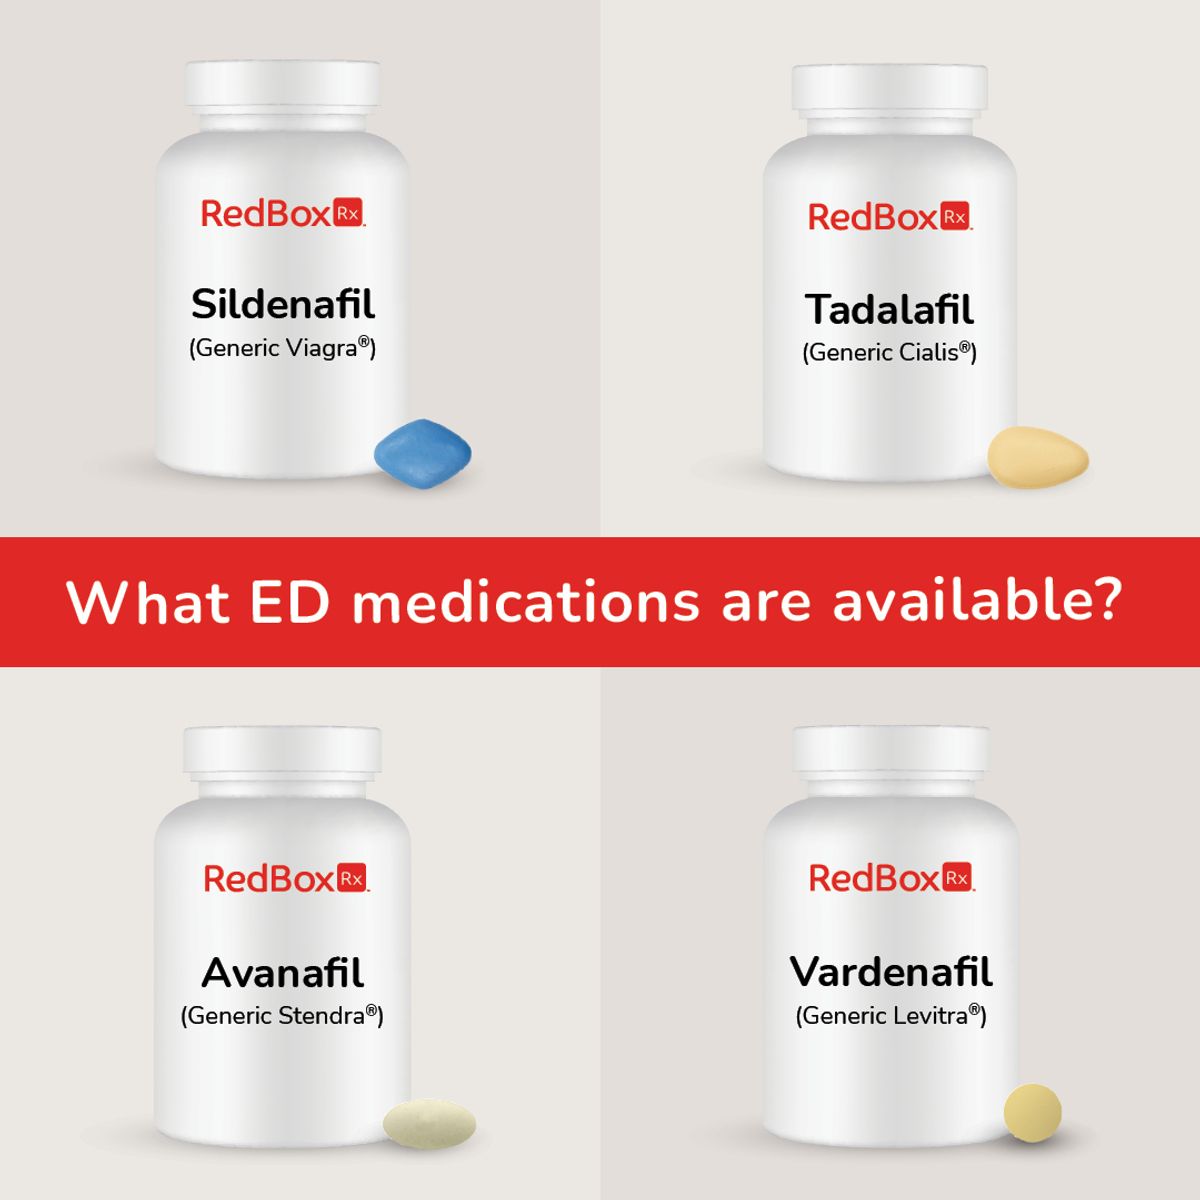 Compare Popular ED Medications: Which is Right for You?